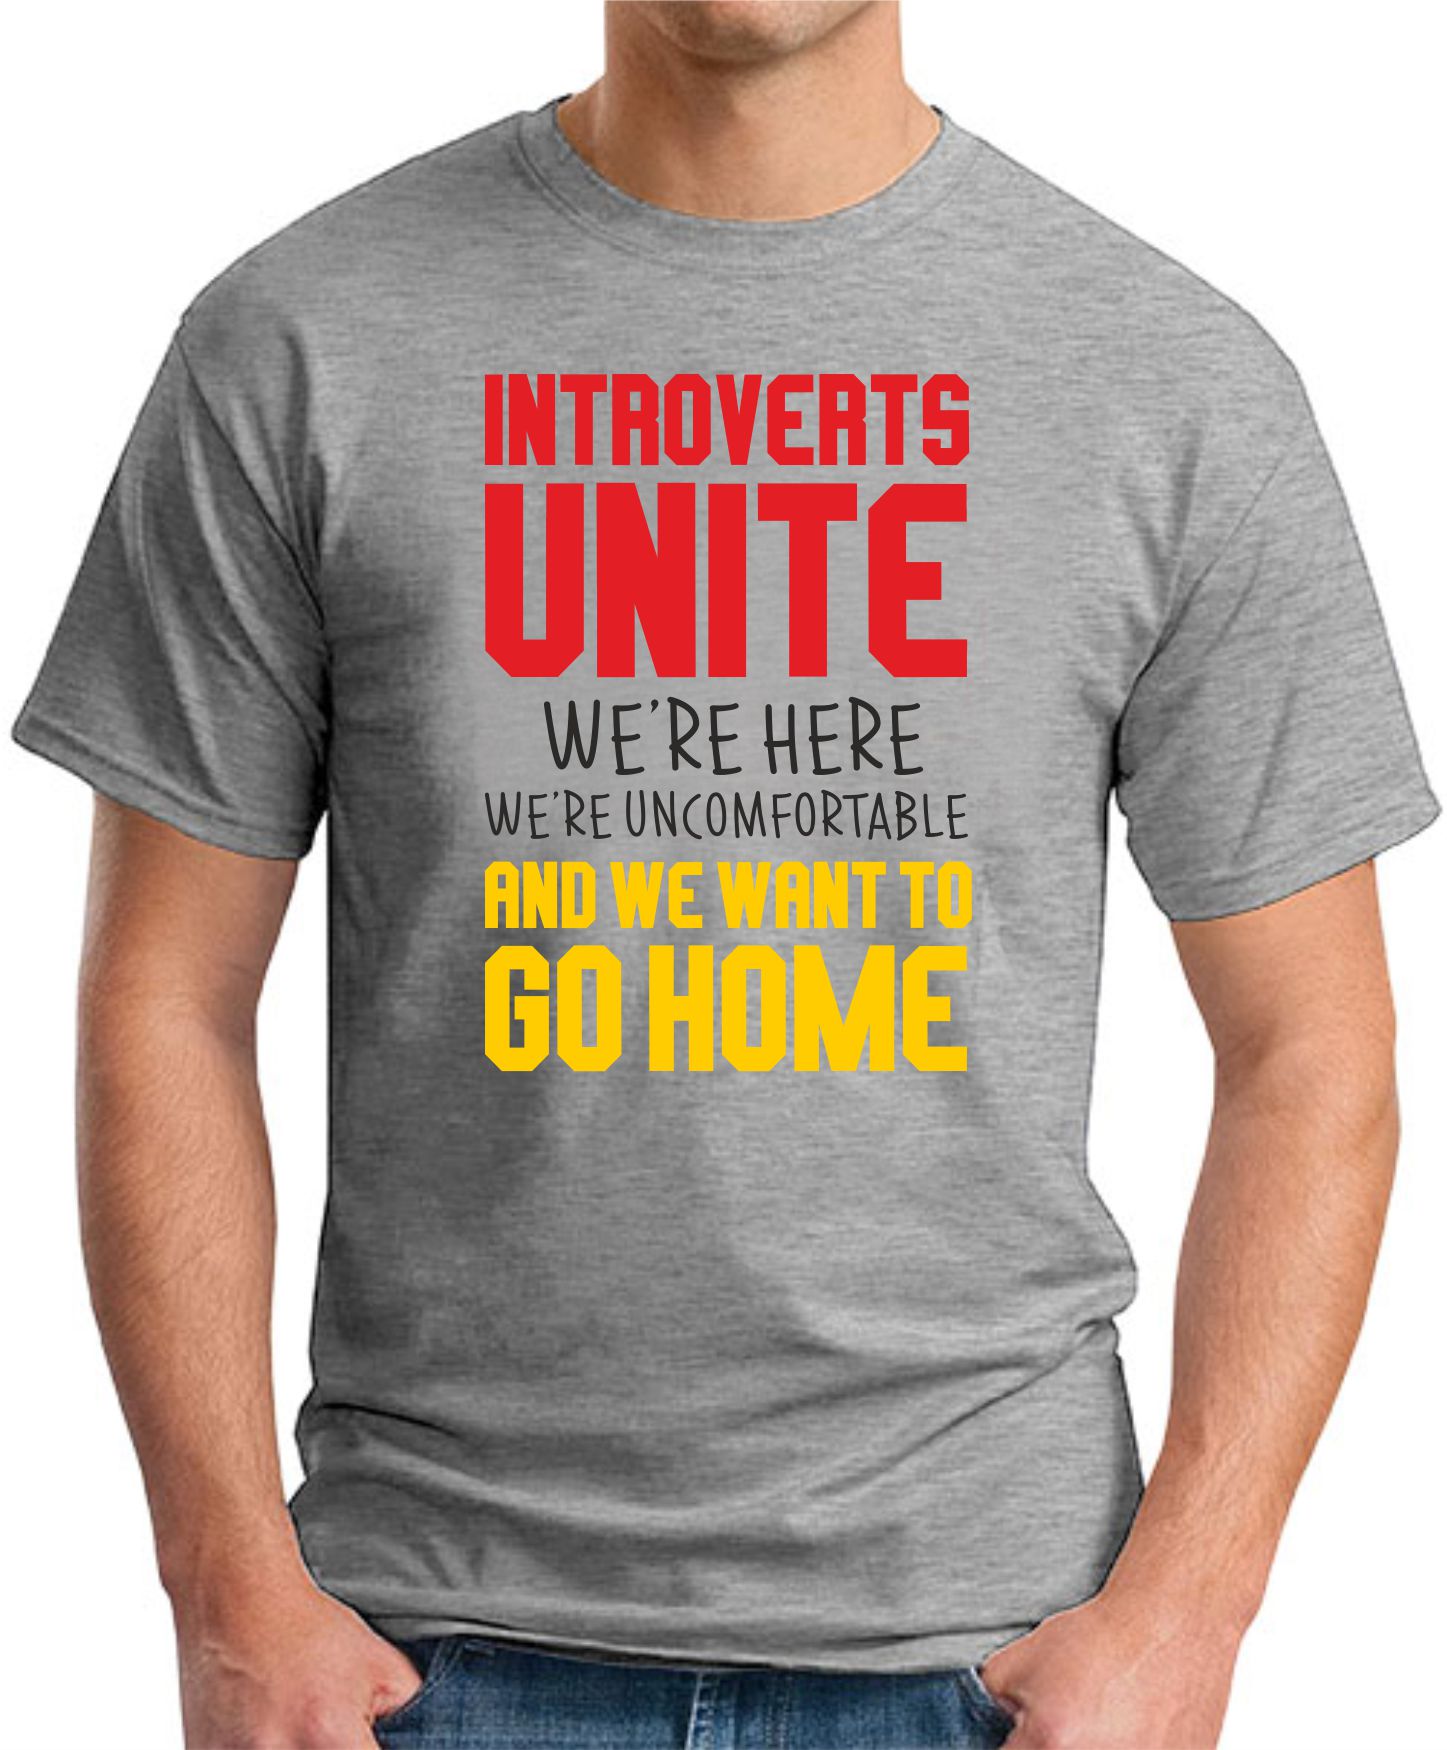 INTROVERTS UNITE T-SHIRT - GeekyTees